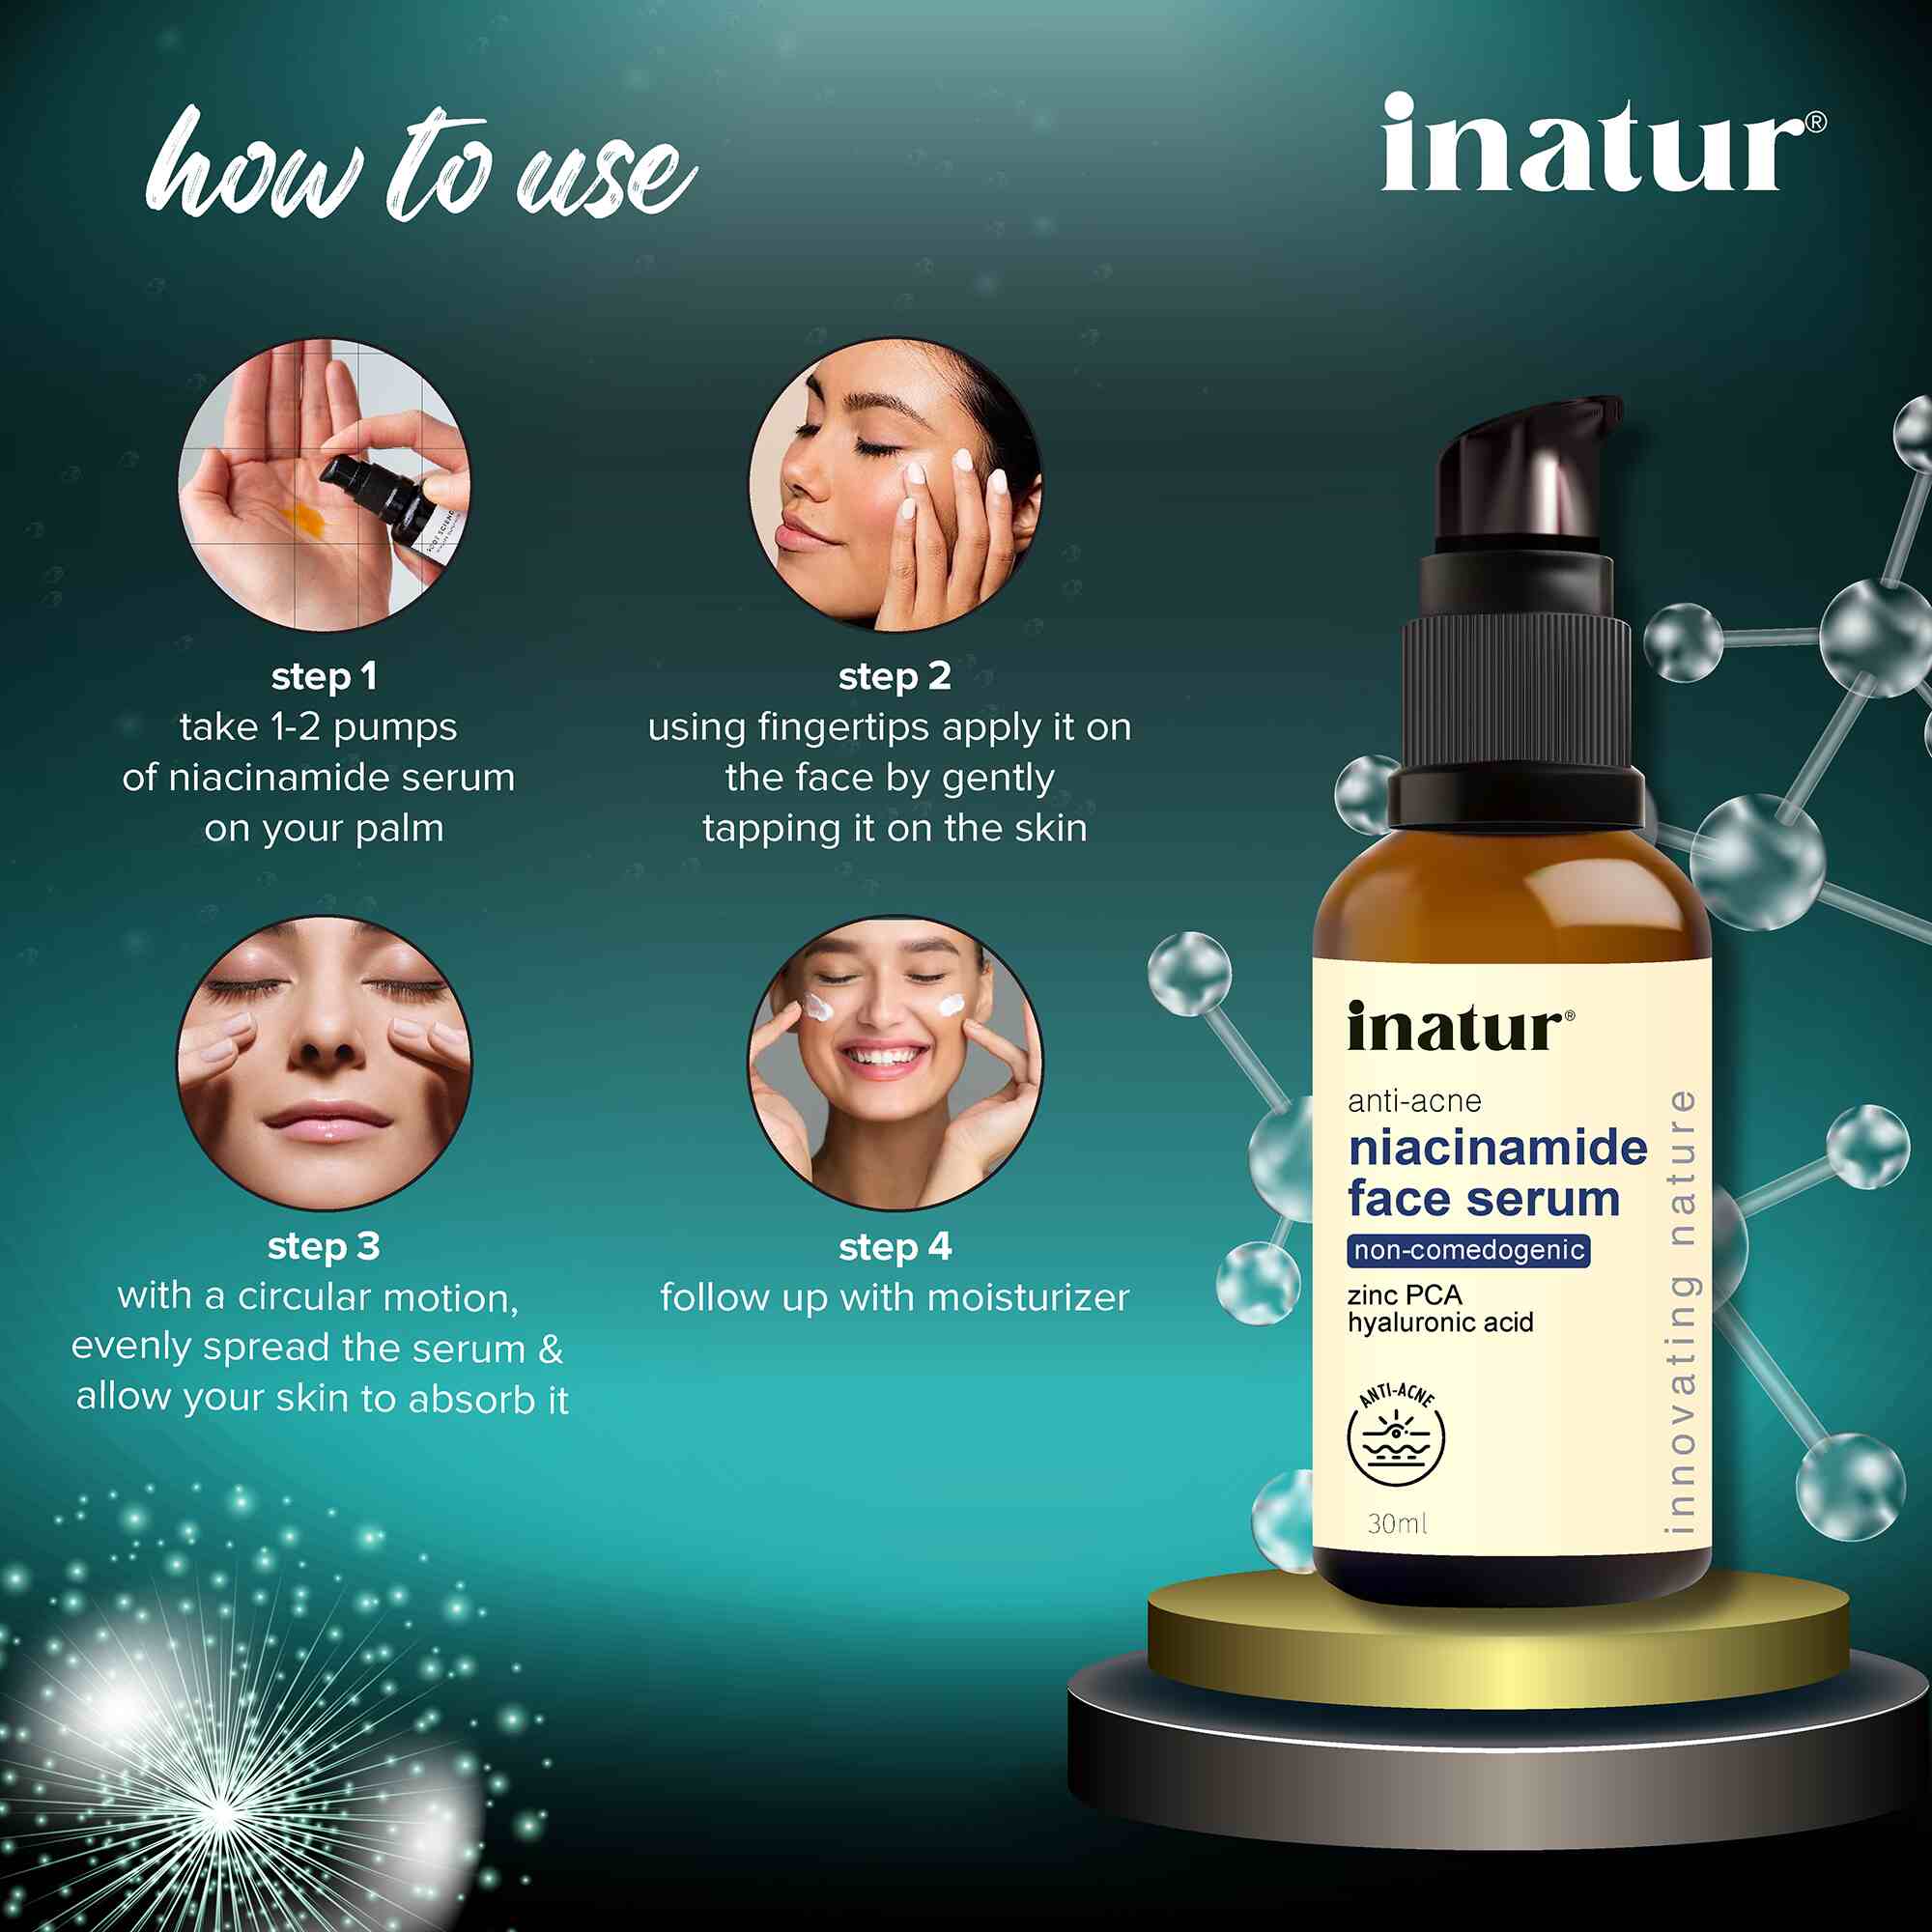 how to use inatur niacinamide face serum